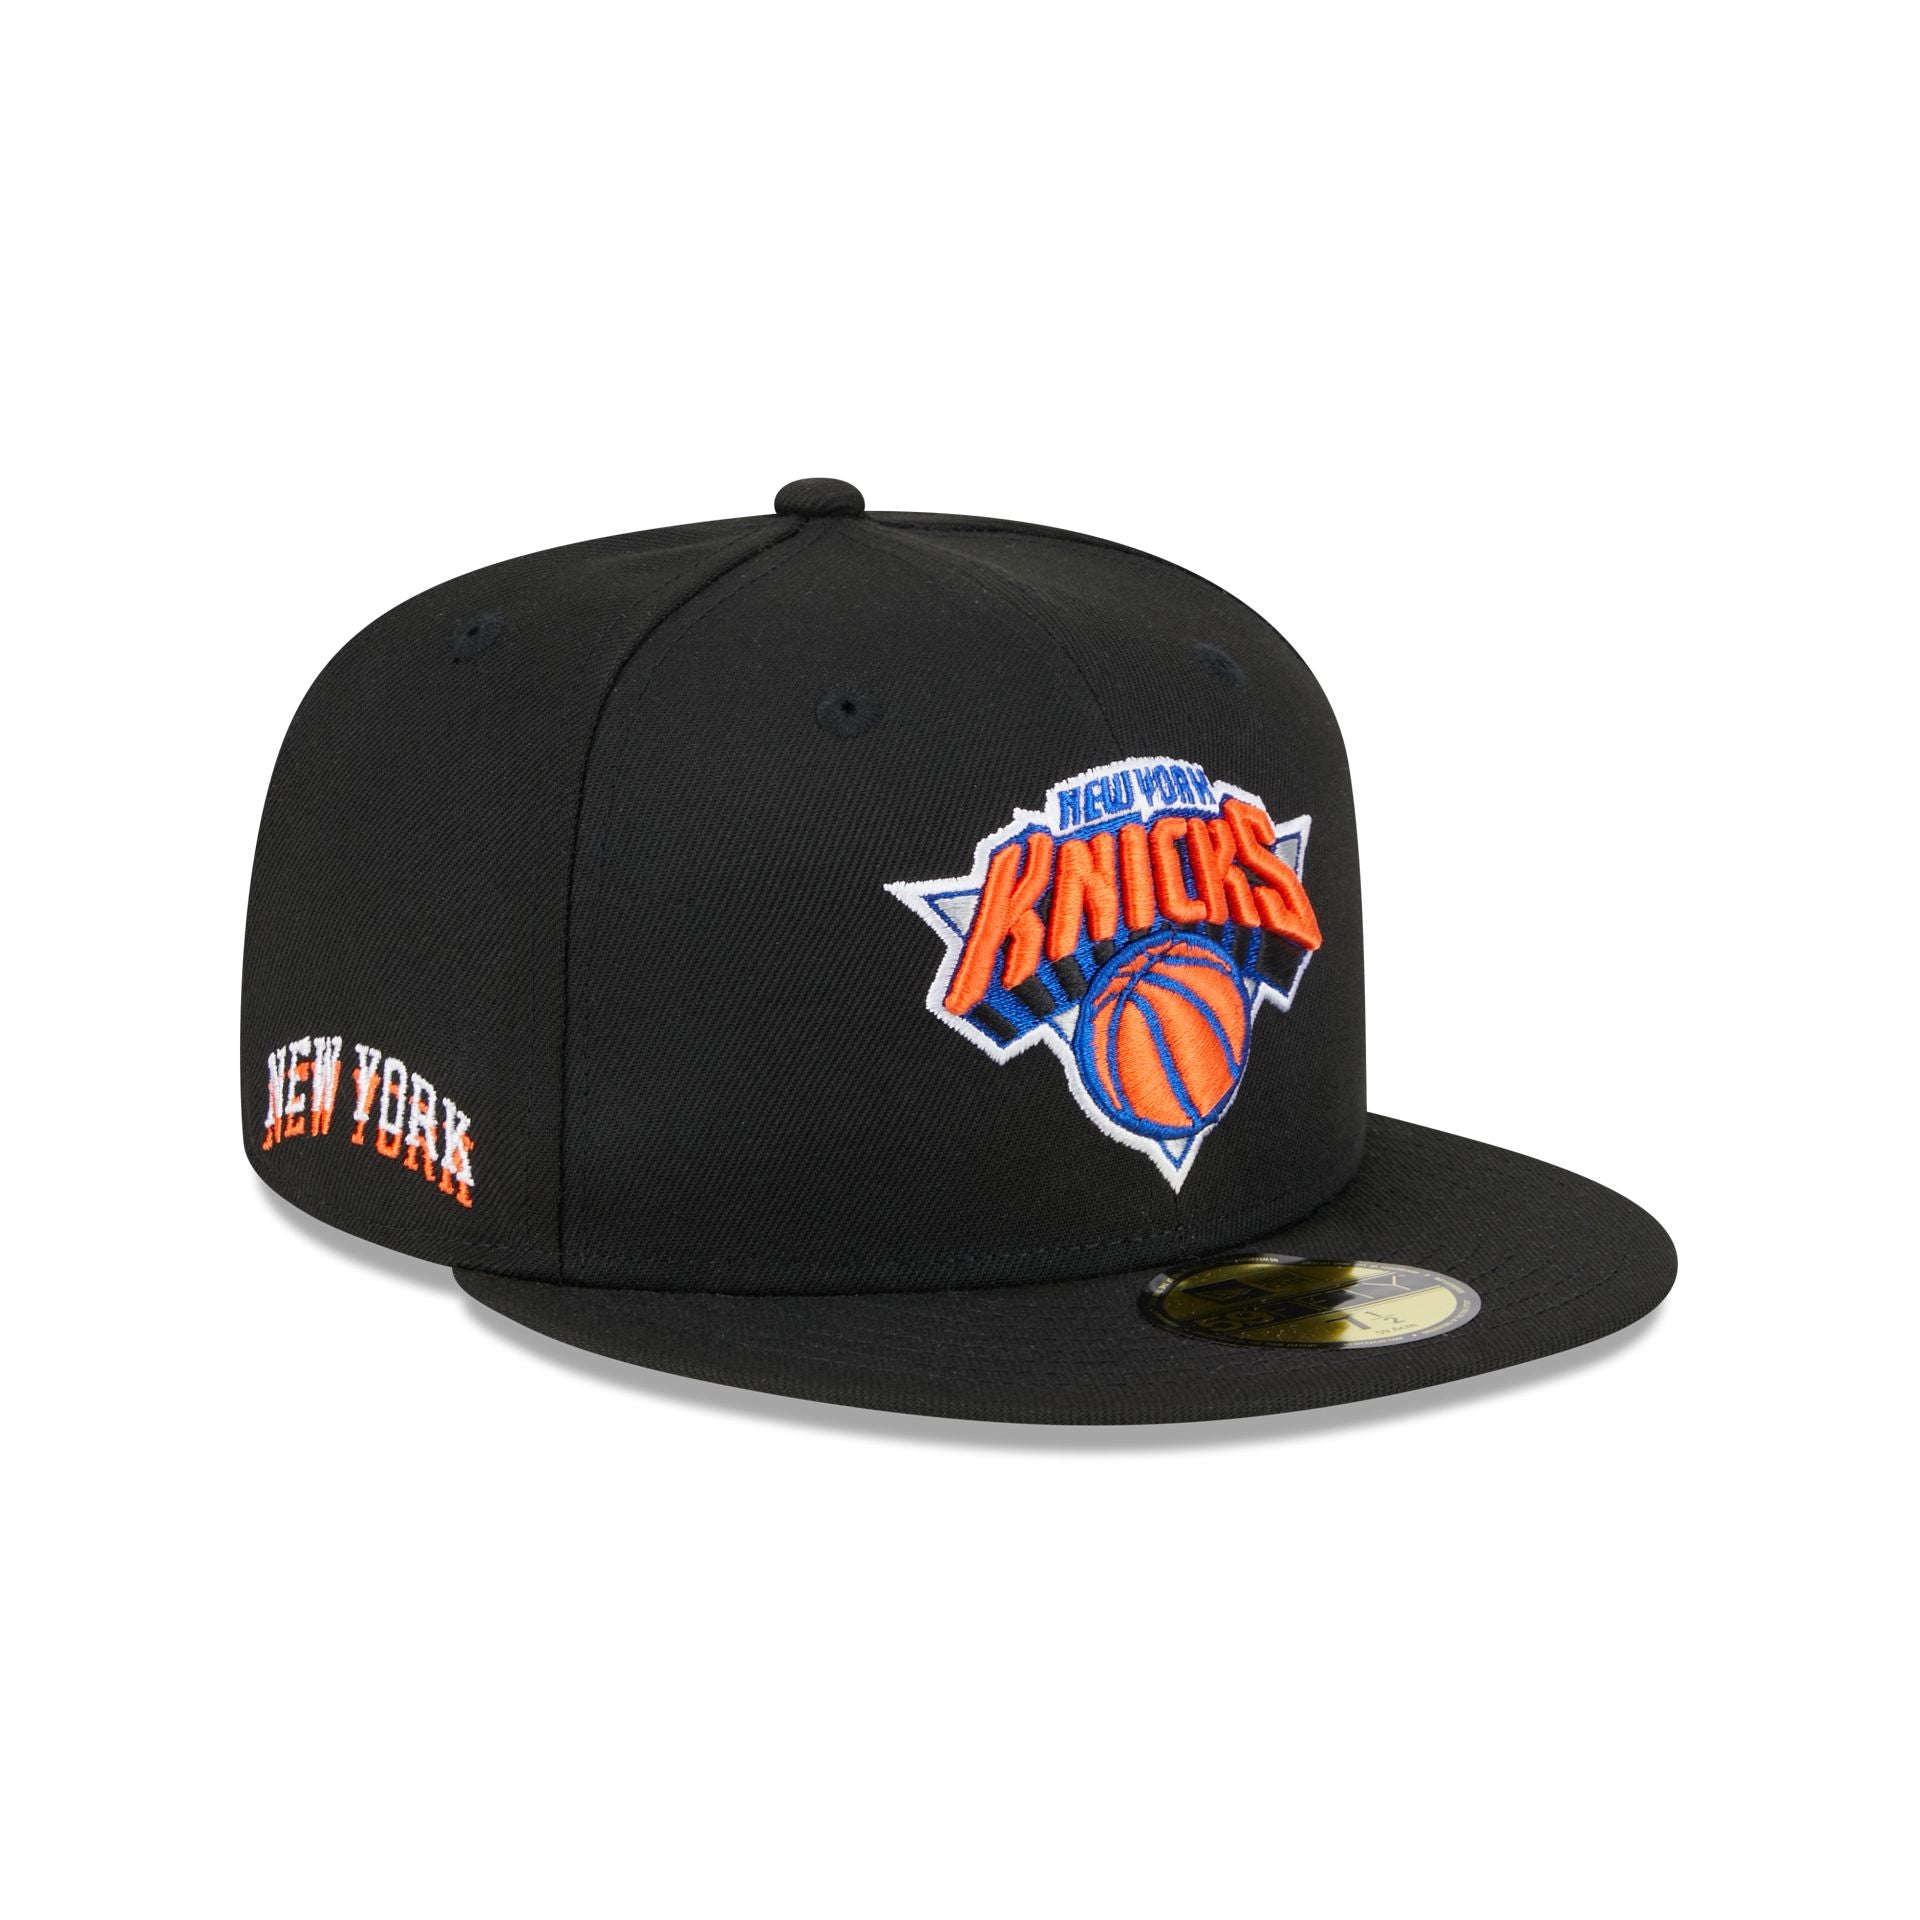 New Era New York Knicks Side 59Fifty Men's Fitted Hat Blue-Green Botto